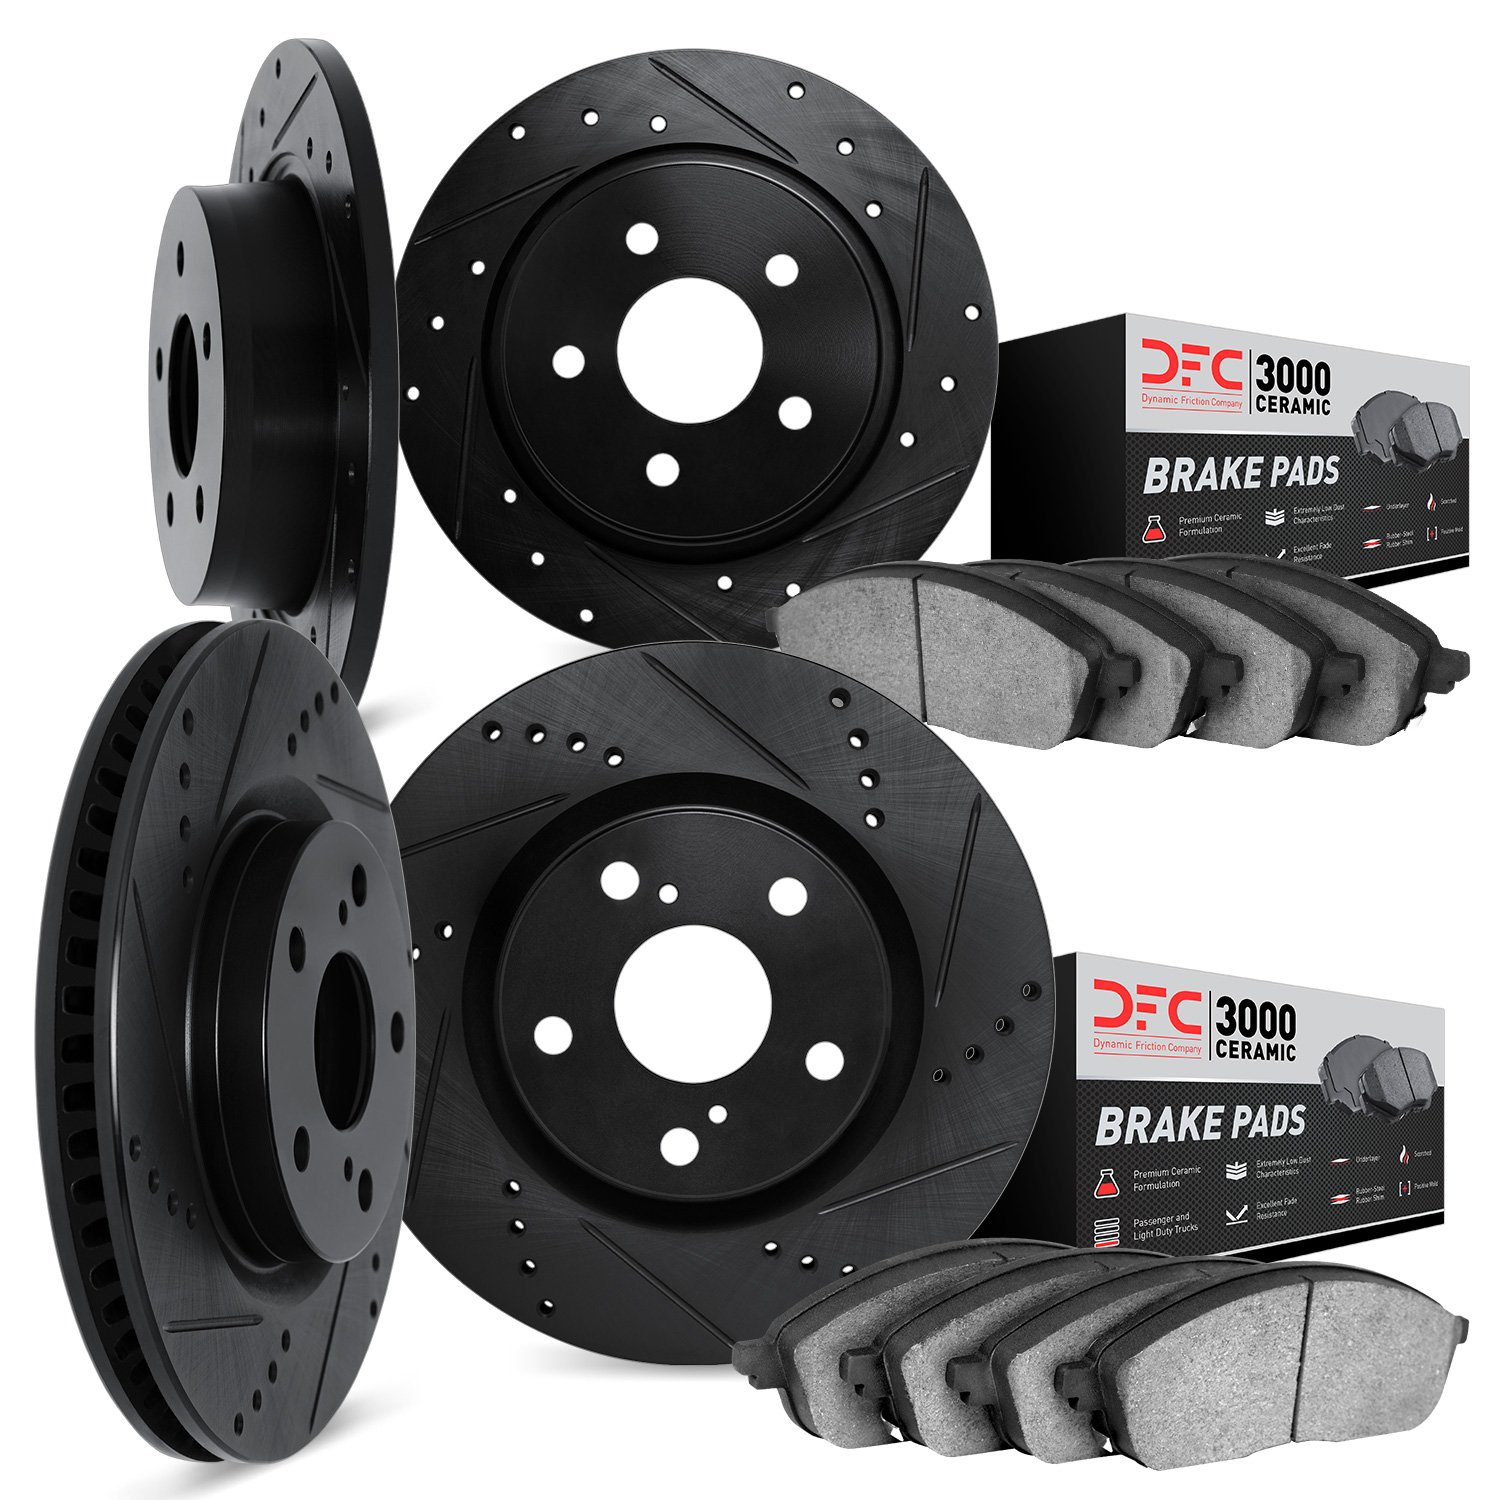 8304-40020 Drilled/Slotted Brake Rotors with 3000-Series Ceramic Brake Pads Kit [Black], 1999-2004 Mopar, Position: Front and Re